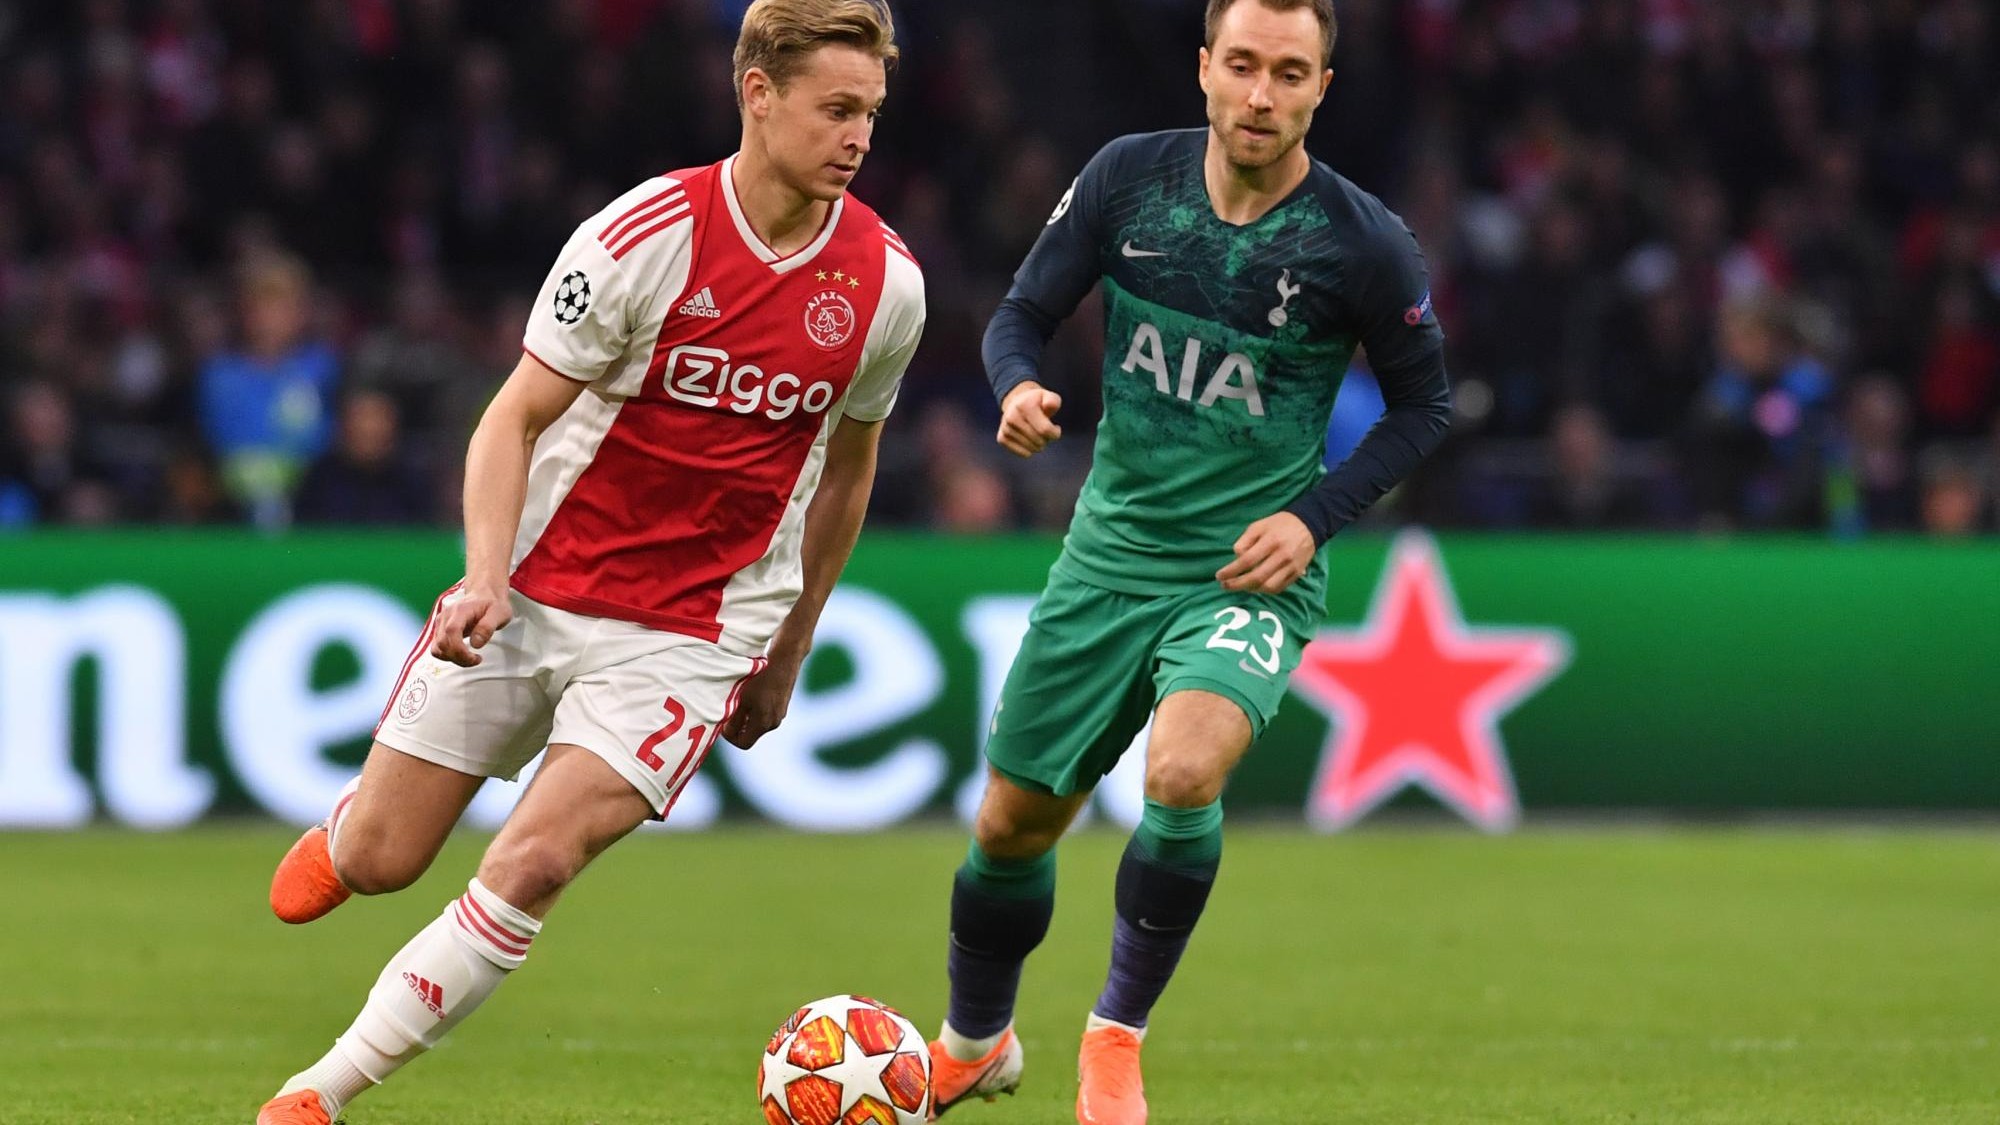 Christian Eriksen considering his options after contract offer from Brentford